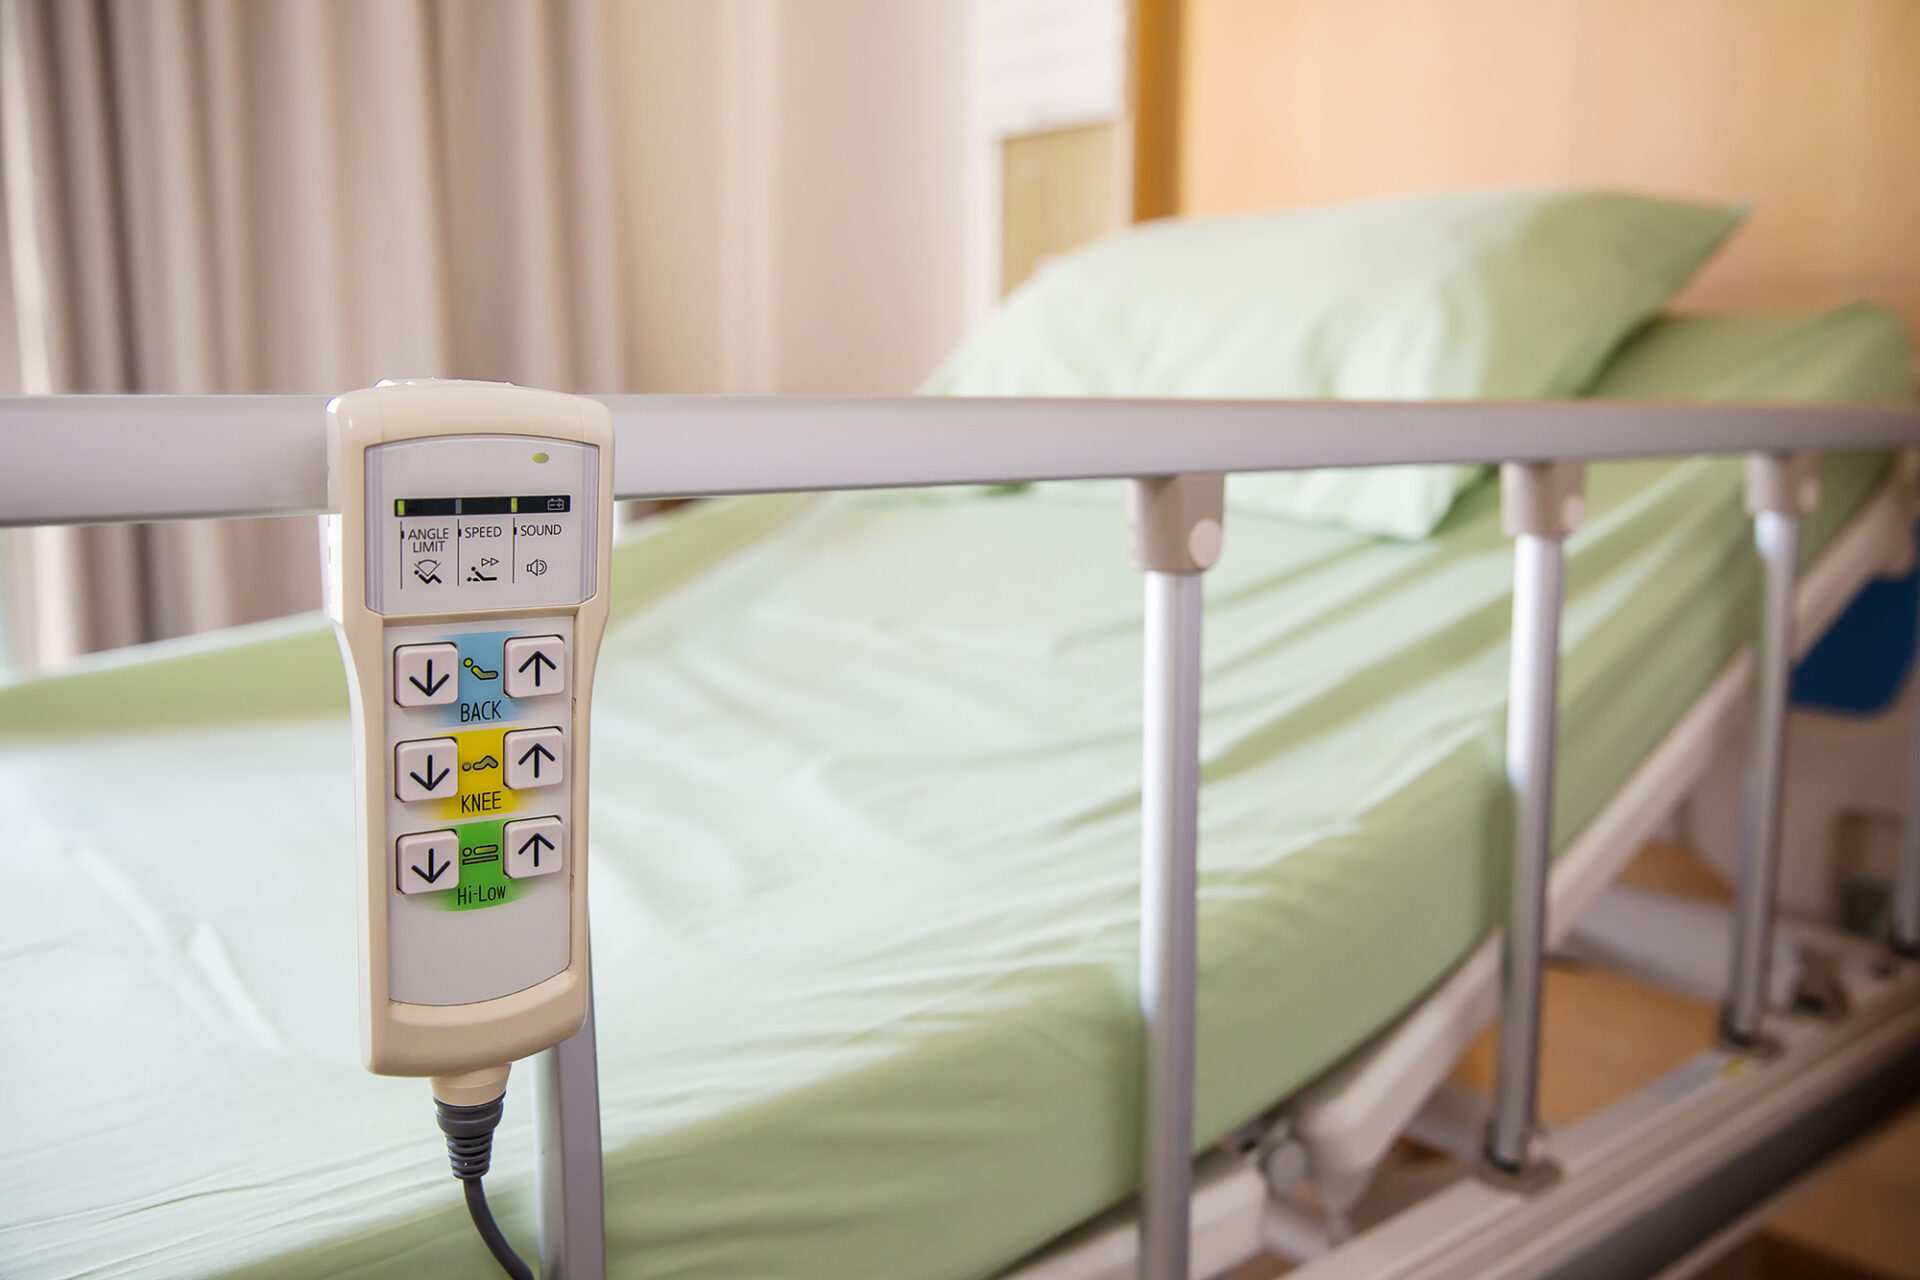 Feds hope to cut sepsis deaths by hitching Medicare payments to treatment stats